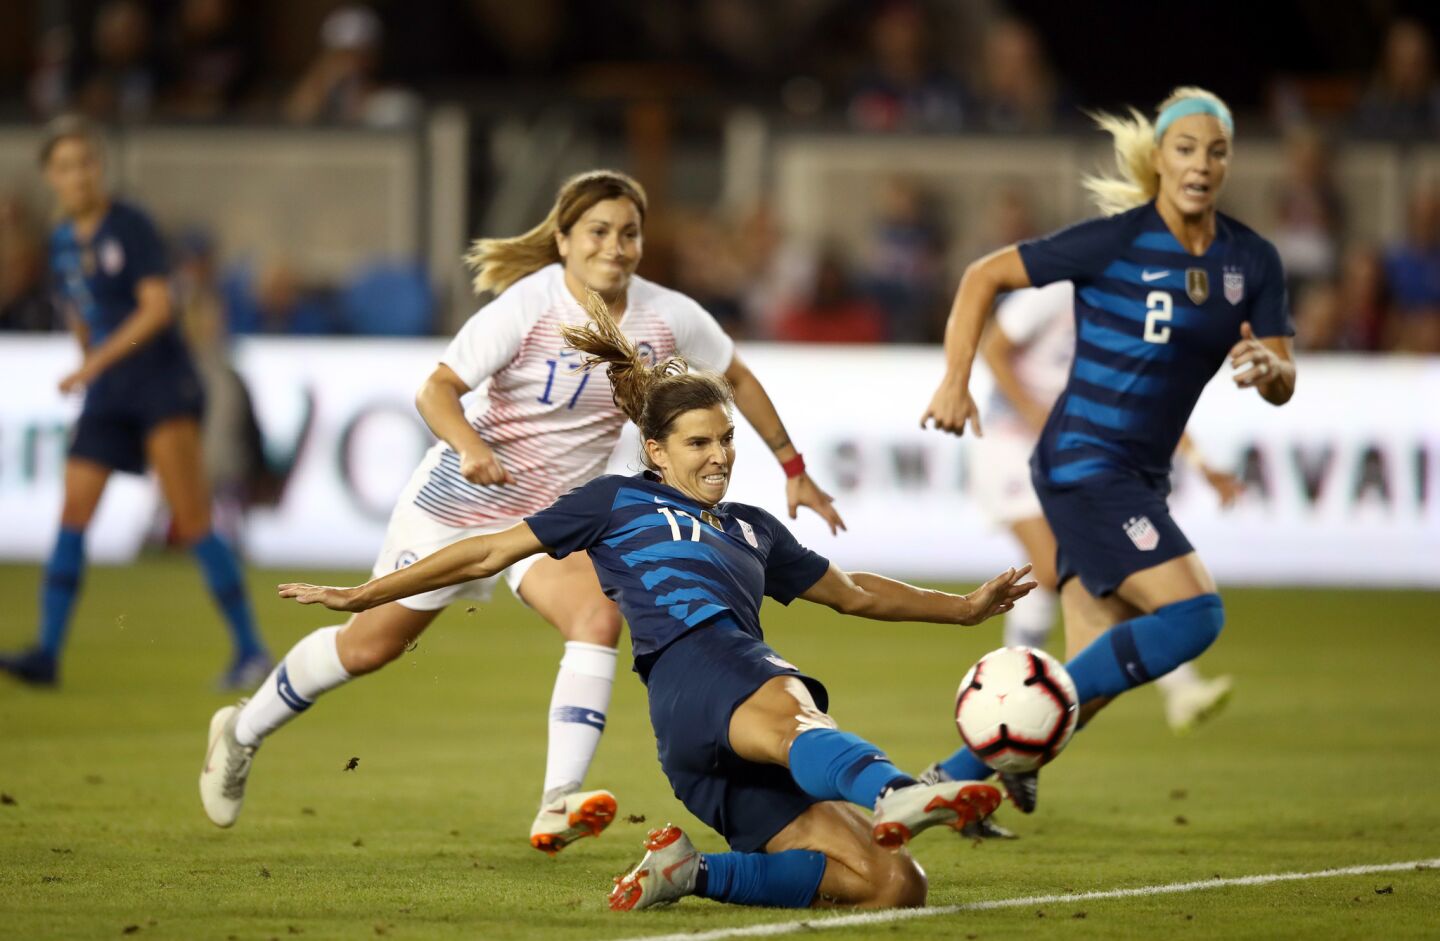 SAN JOSE, CA - SEPTEMBER 04: Tobin Heath of the United States scores a goal against Chile during their match at Avaya Stadium on September 4, 2018 in San Jose, California. (Photo by Ezra Shaw/Getty Images) ** OUTS - ELSENT, FPG, CM - OUTS * NM, PH, VA if sourced by CT, LA or MoD **